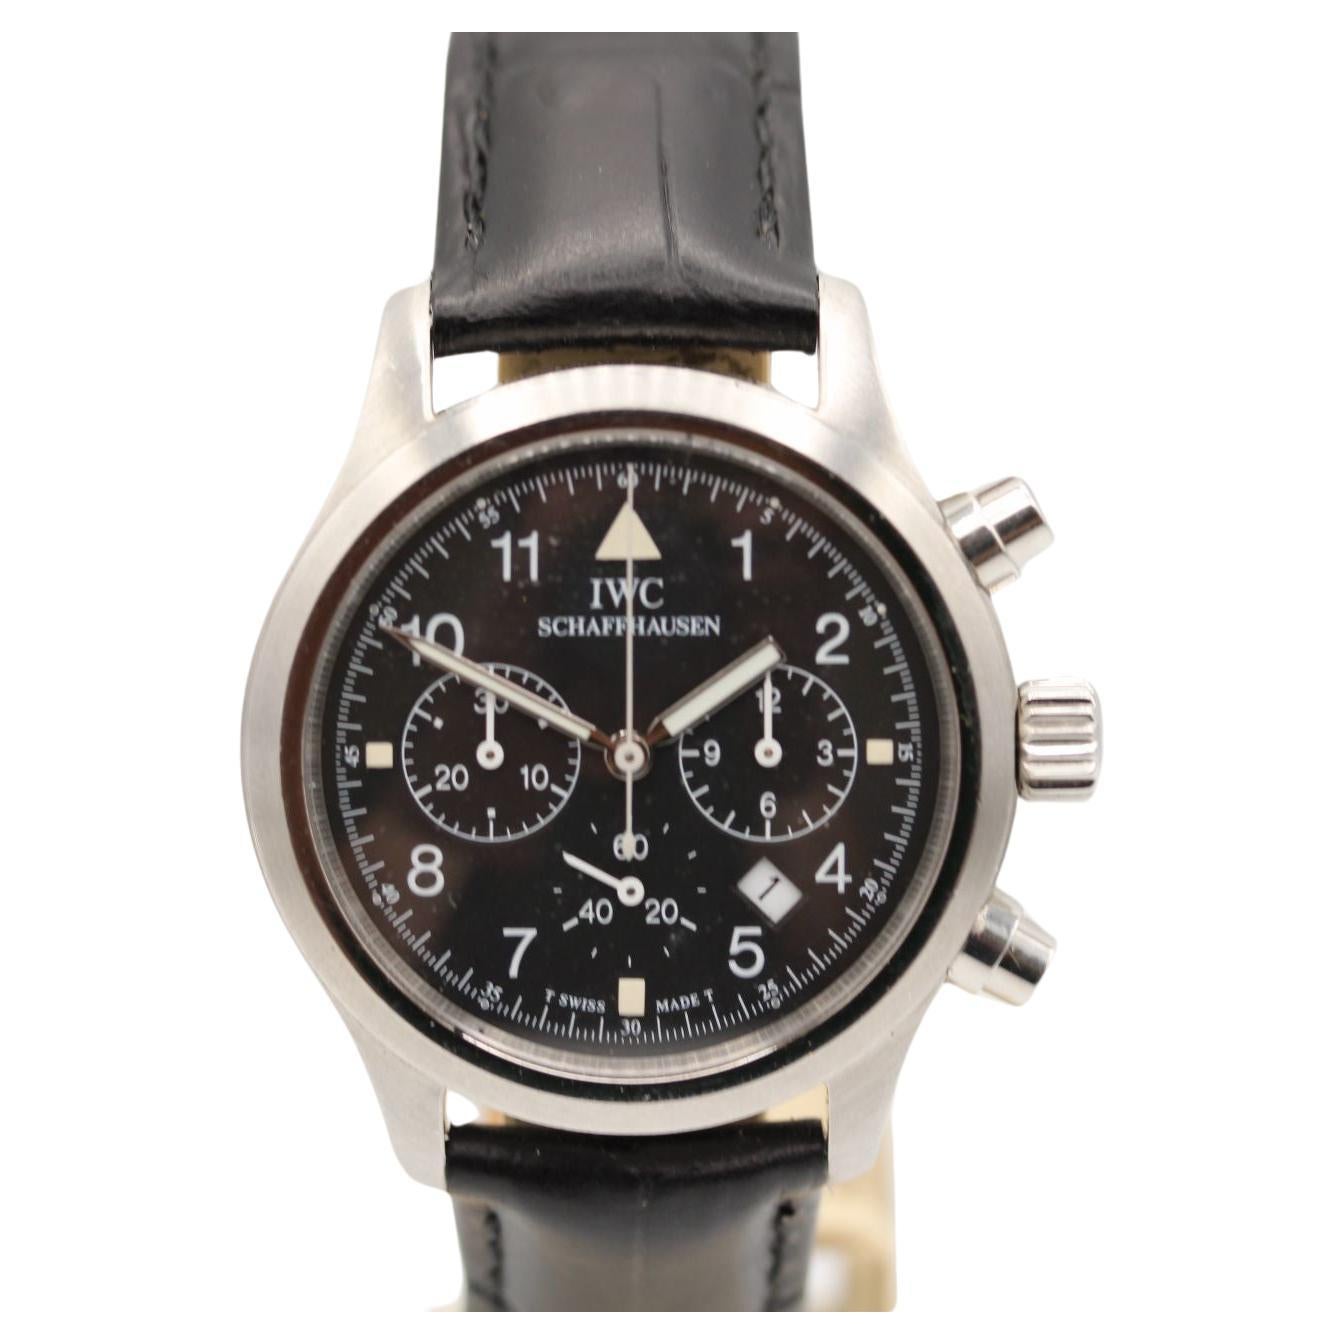  IWC Pilot Chronograph IW3741 Box and Papers 1997  For Sale